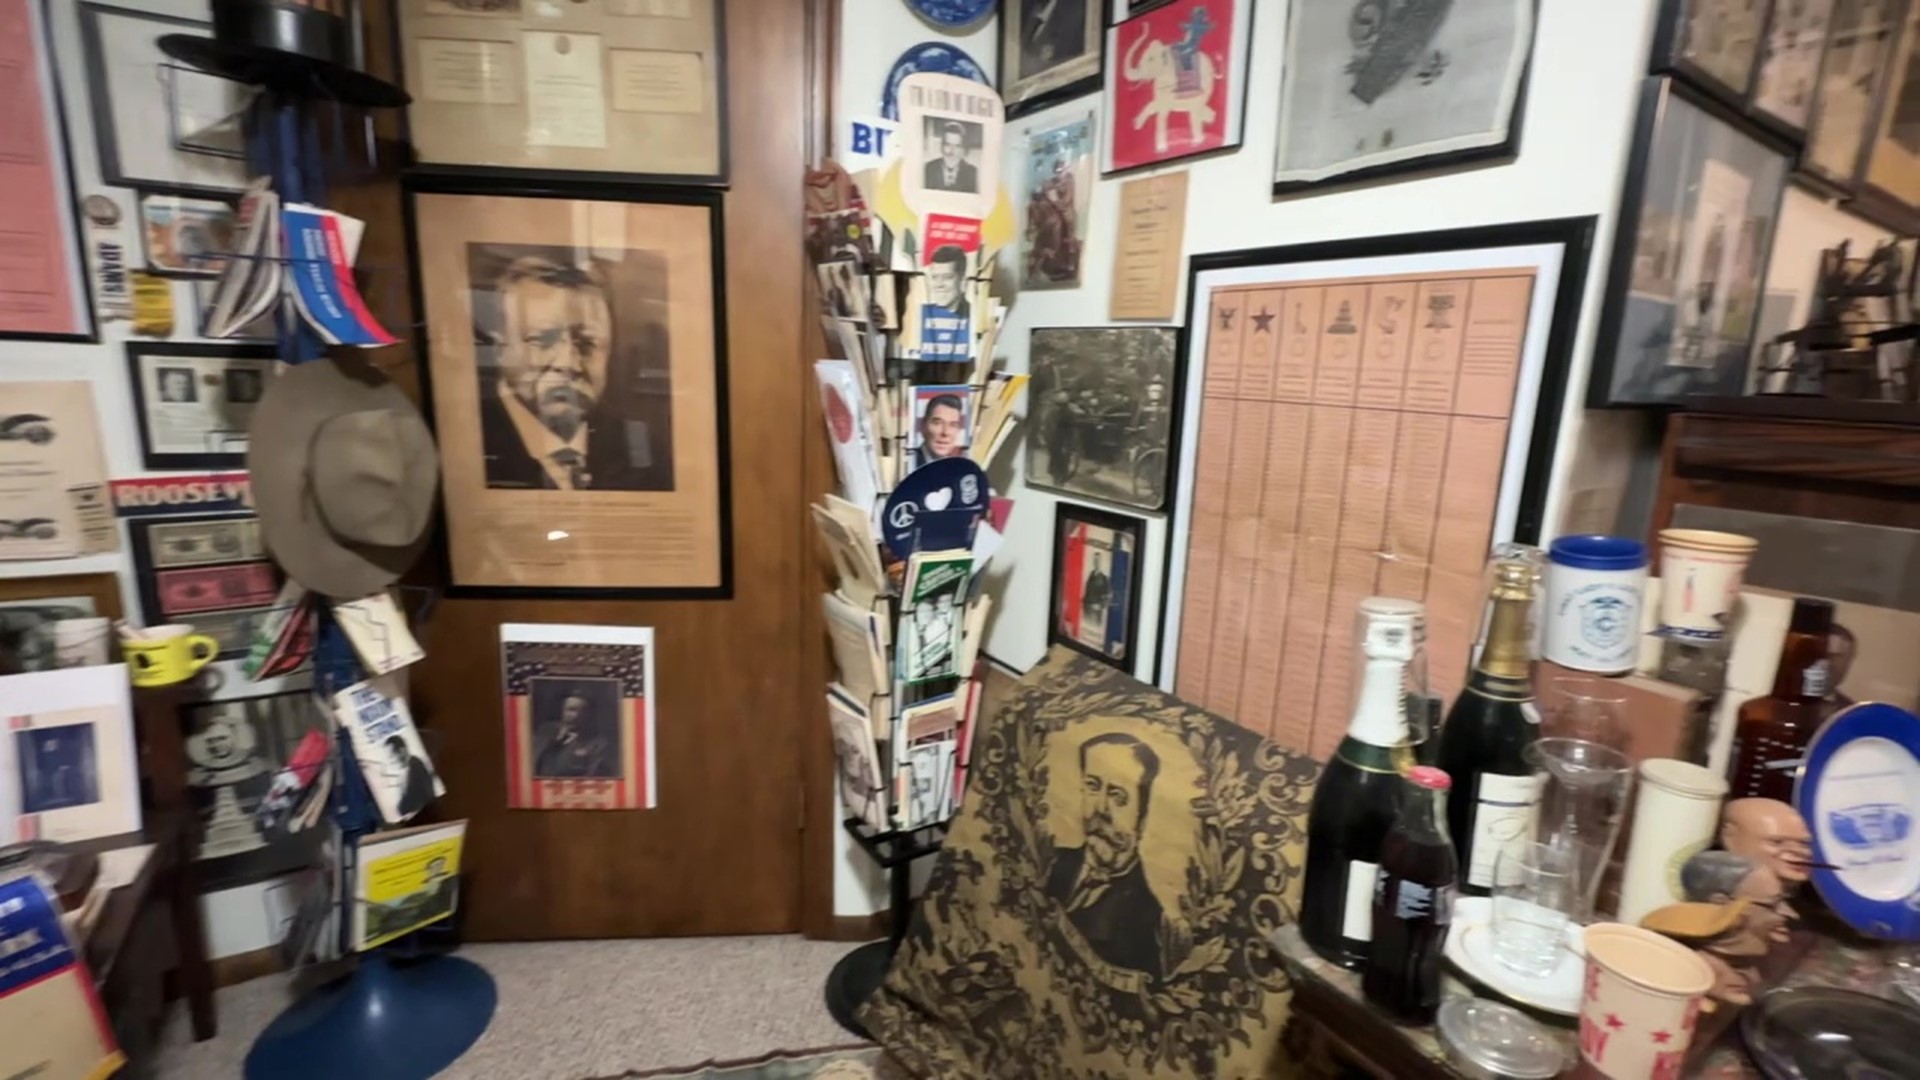 In honor of President Abraham Lincoln's birthday, Newswatch 16's Chelsea Strub checked out a compilation of chief executive collectibles in Luzerne County.